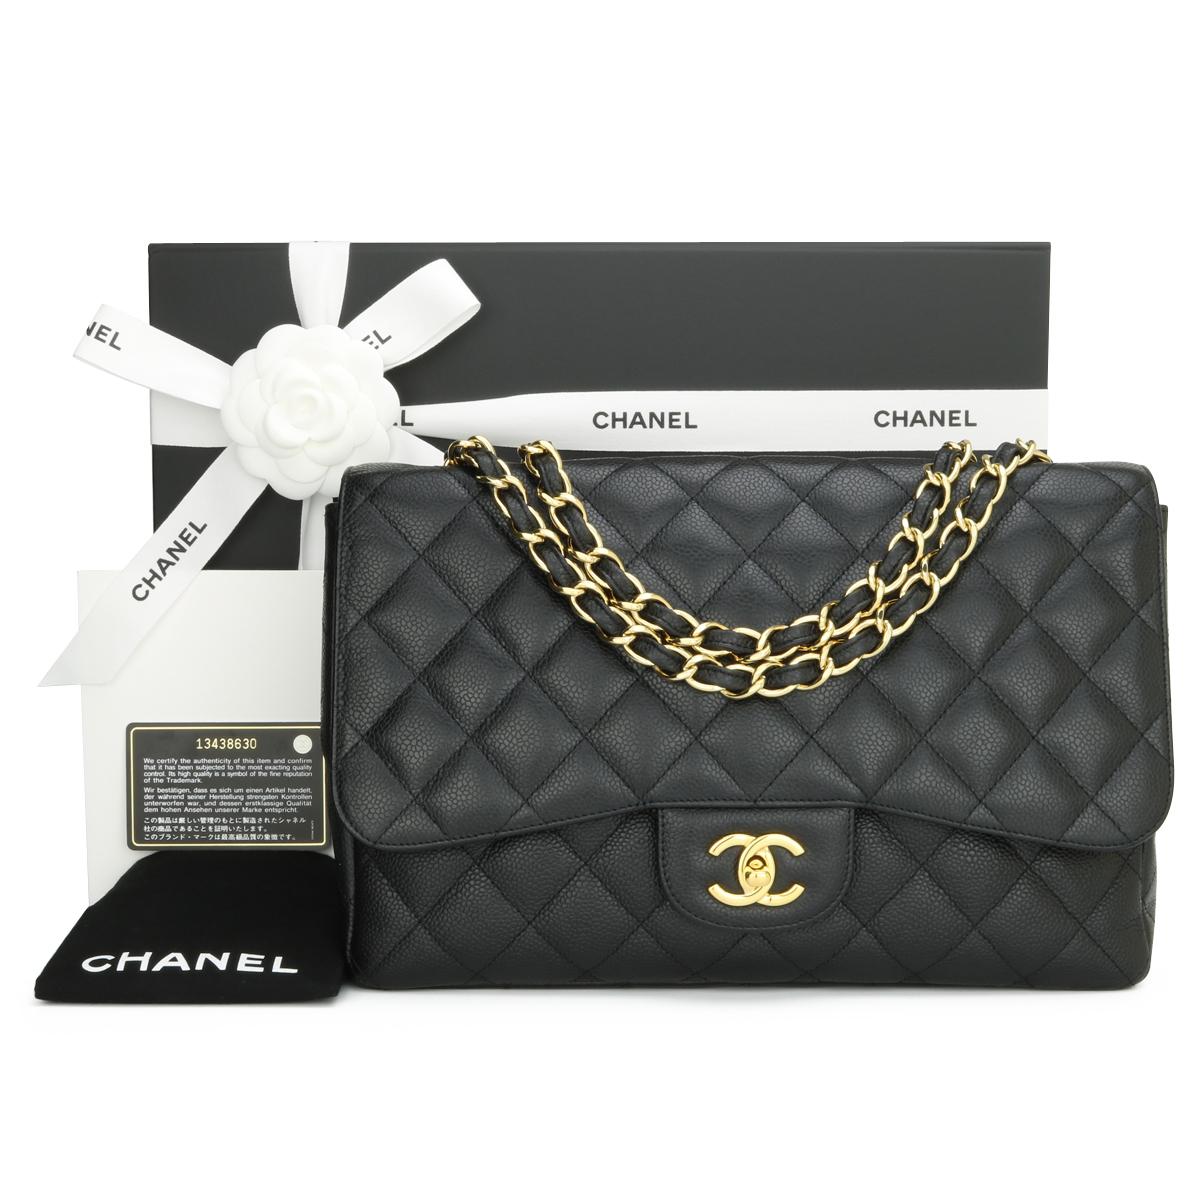 CHANEL Classic Single Flap Jumbo Bag Black Caviar with Gold Hardware 2010.

This stunning bag is in very good condition, the bag still holds its shape well, and the hardware is still very shiny. It is such a lightweight bag compared to double flap